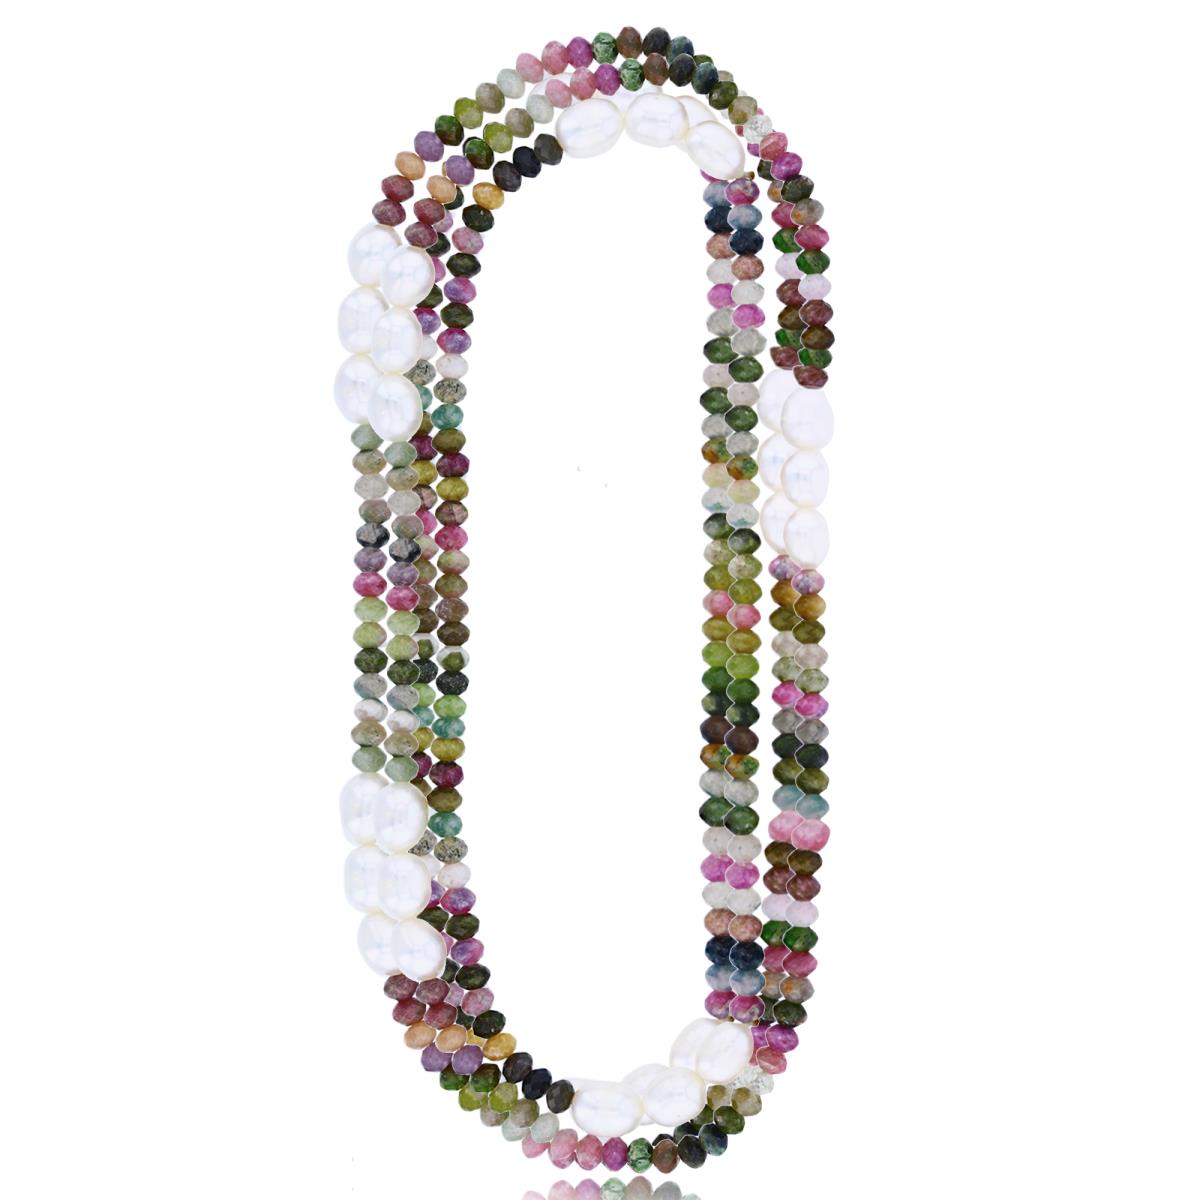 7-8mm Oval FWP & 4x5mm Tourmaline 72" Necklace